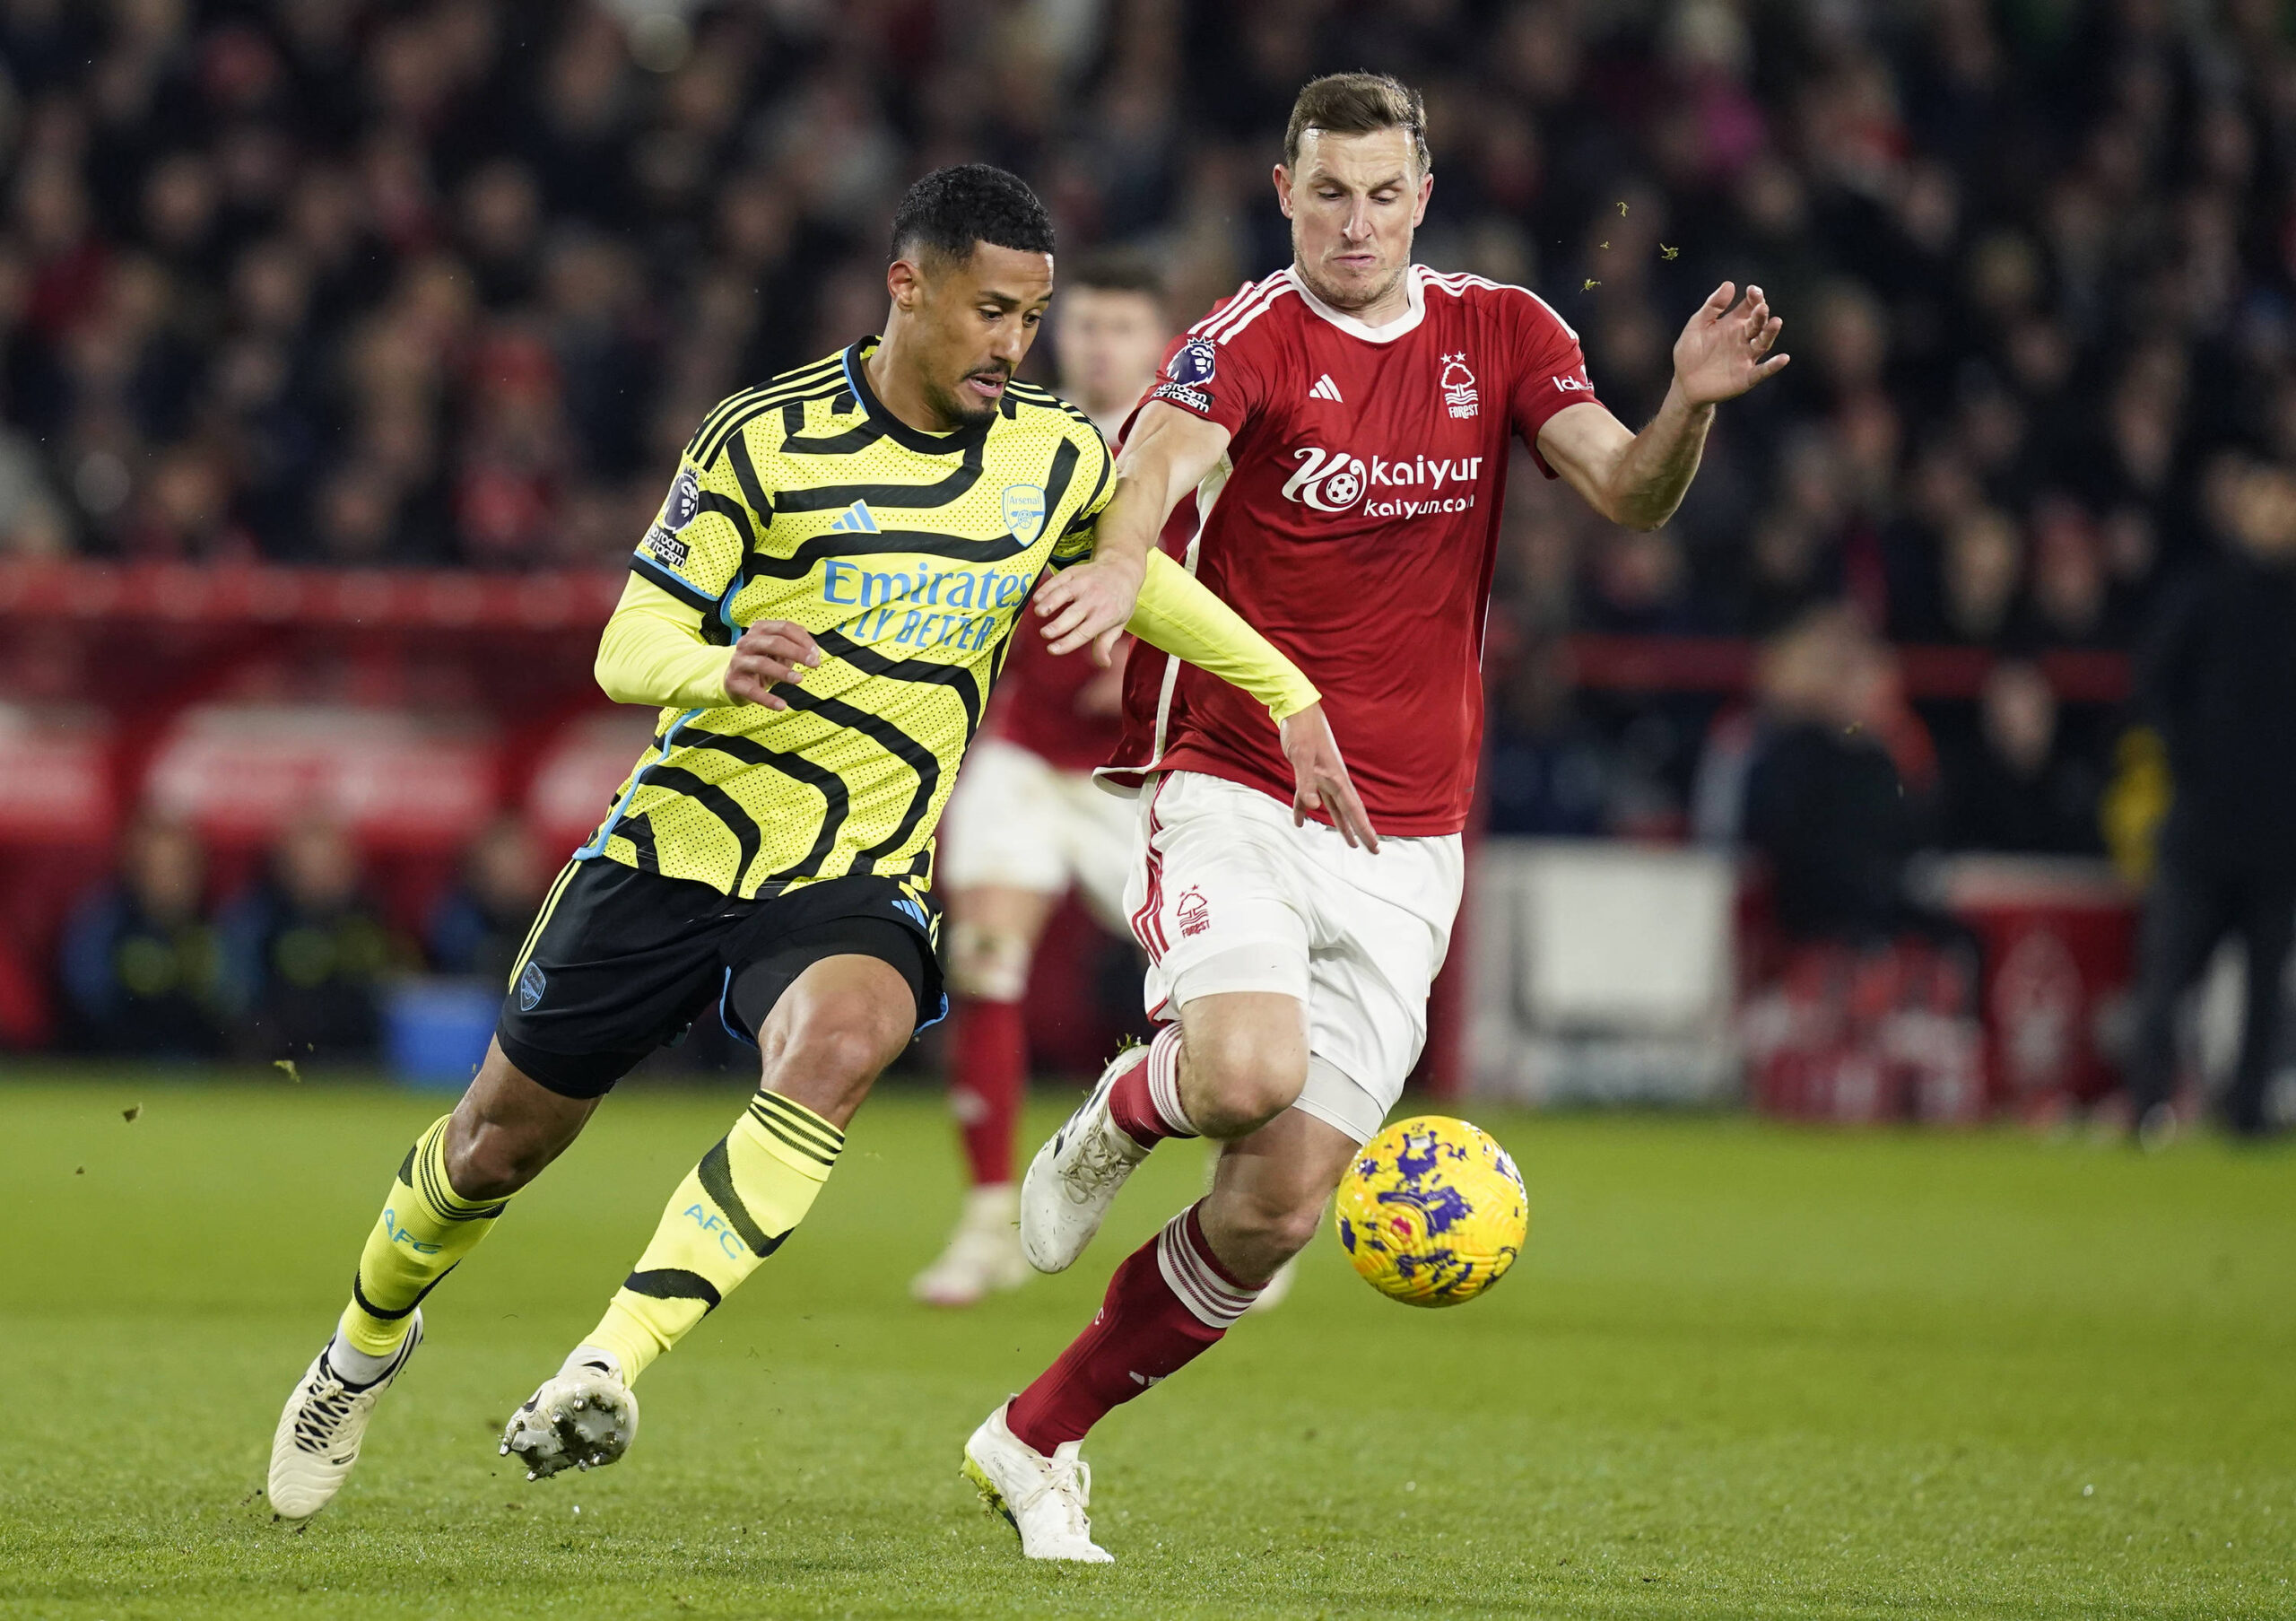 Nottingham Forest striker Chris Wood to miss extended period of time due to injury.